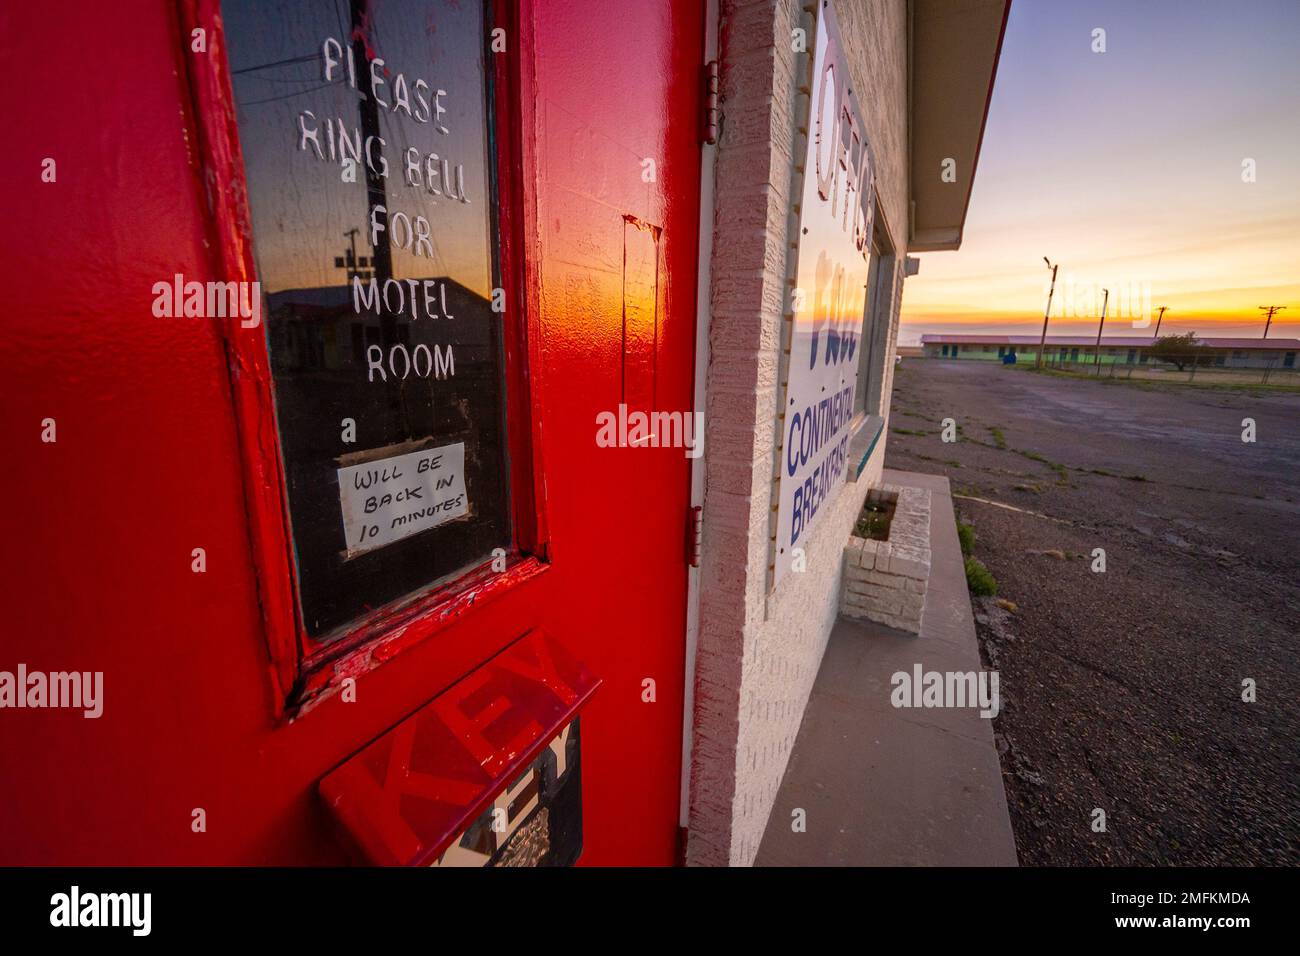 'Back in 10 minutes' - sign on an abandoned motel in Panhandle, Texas, USA, May 2022 Stock Photo